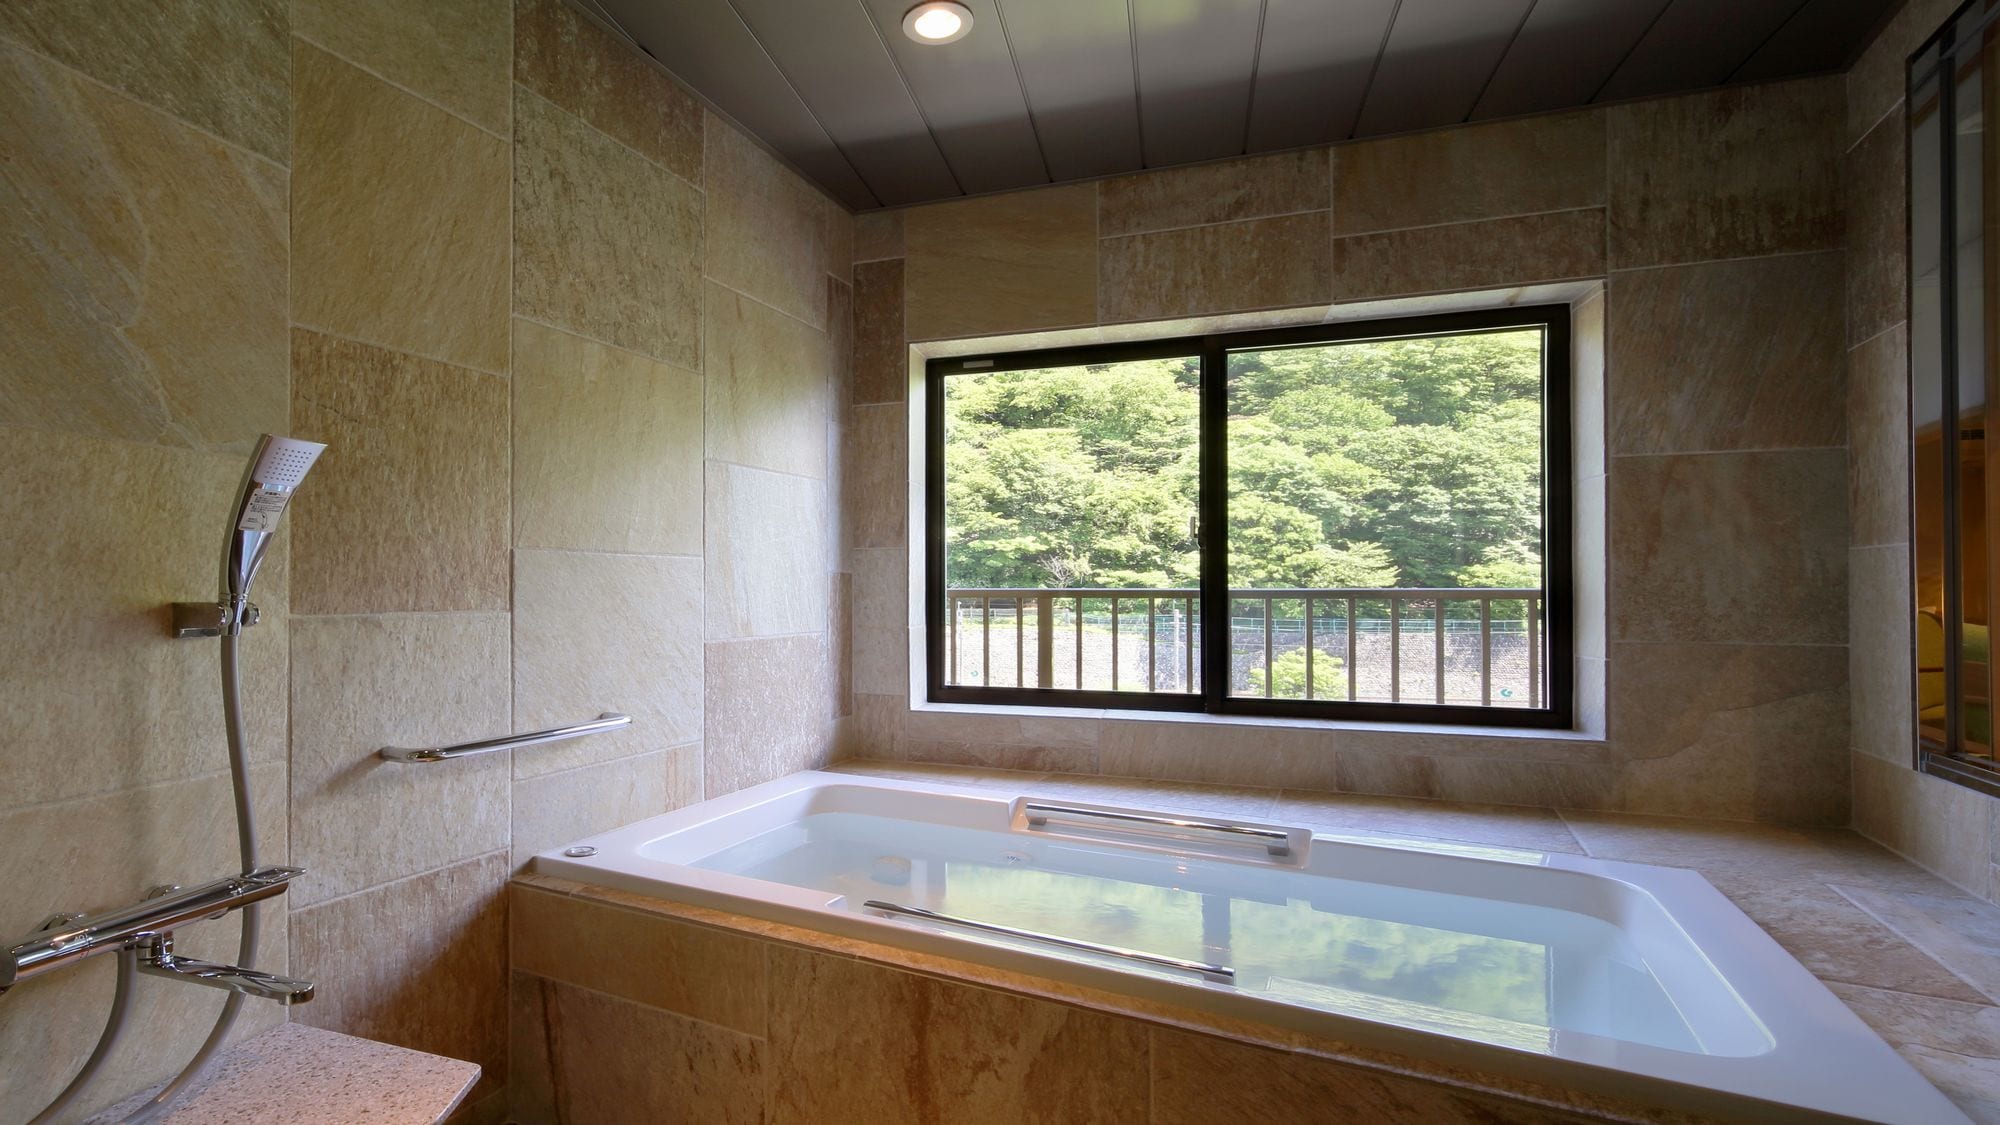 ◆ Relax Japanese and Western room ☆ You can enjoy the hot spring in the view bath facing the Kinugawa